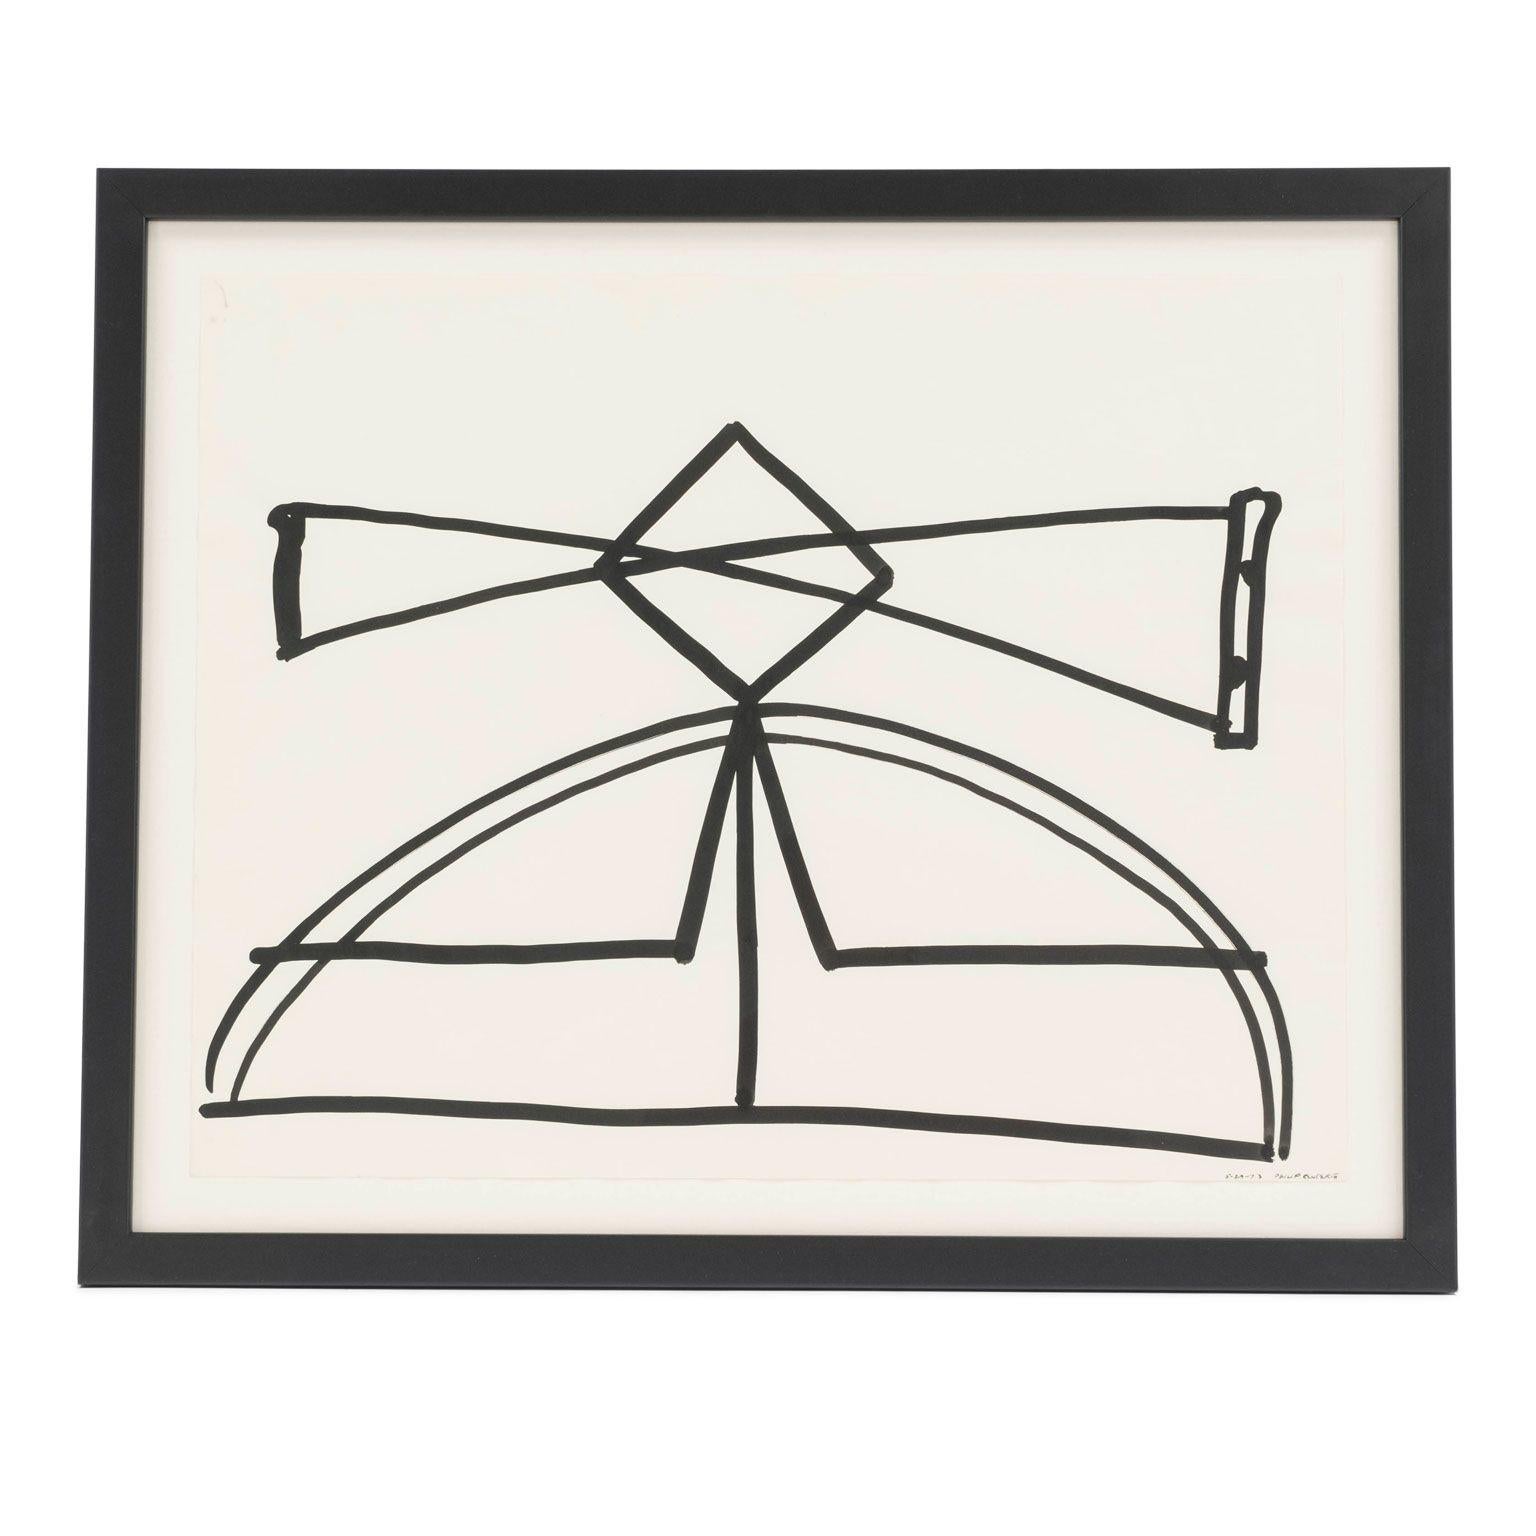 Minimalistic black-and-white abstract ink-on-paper by Philip Renteria (1947-1998), 1973. Untitled brush and ink on paper, both dated and one hand-signed by artist. Newly-framed, float-mounted within black metal frame over a linen backing. Two